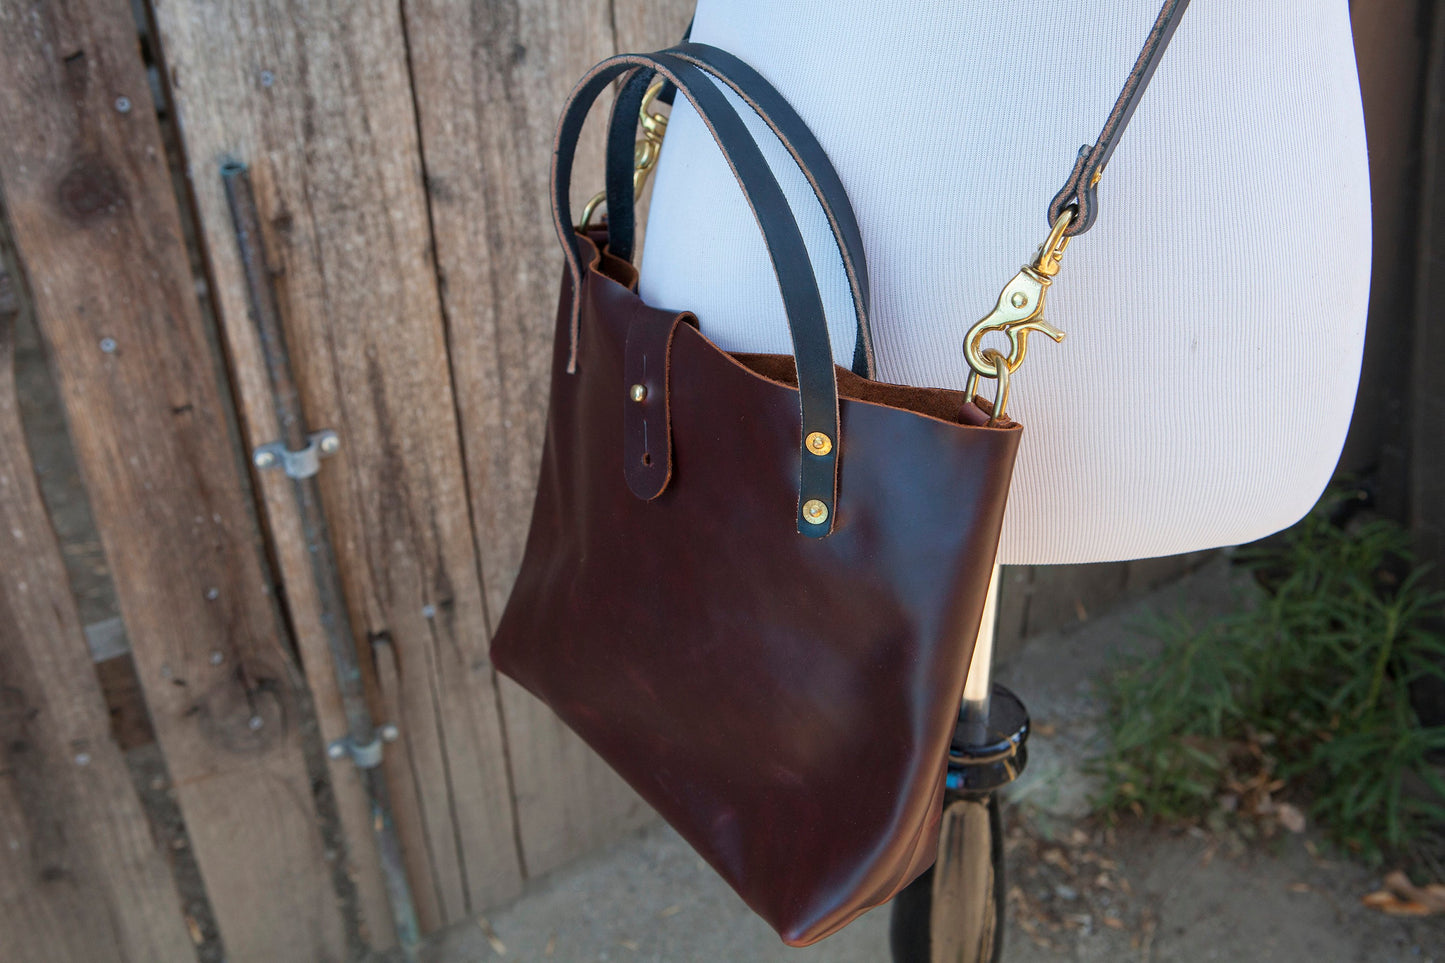 Made to Order - Oxblood Burgundy Handbag with Shoulder Strap, Black English Bridle Handles and Solid Brass Hardware Made in USA